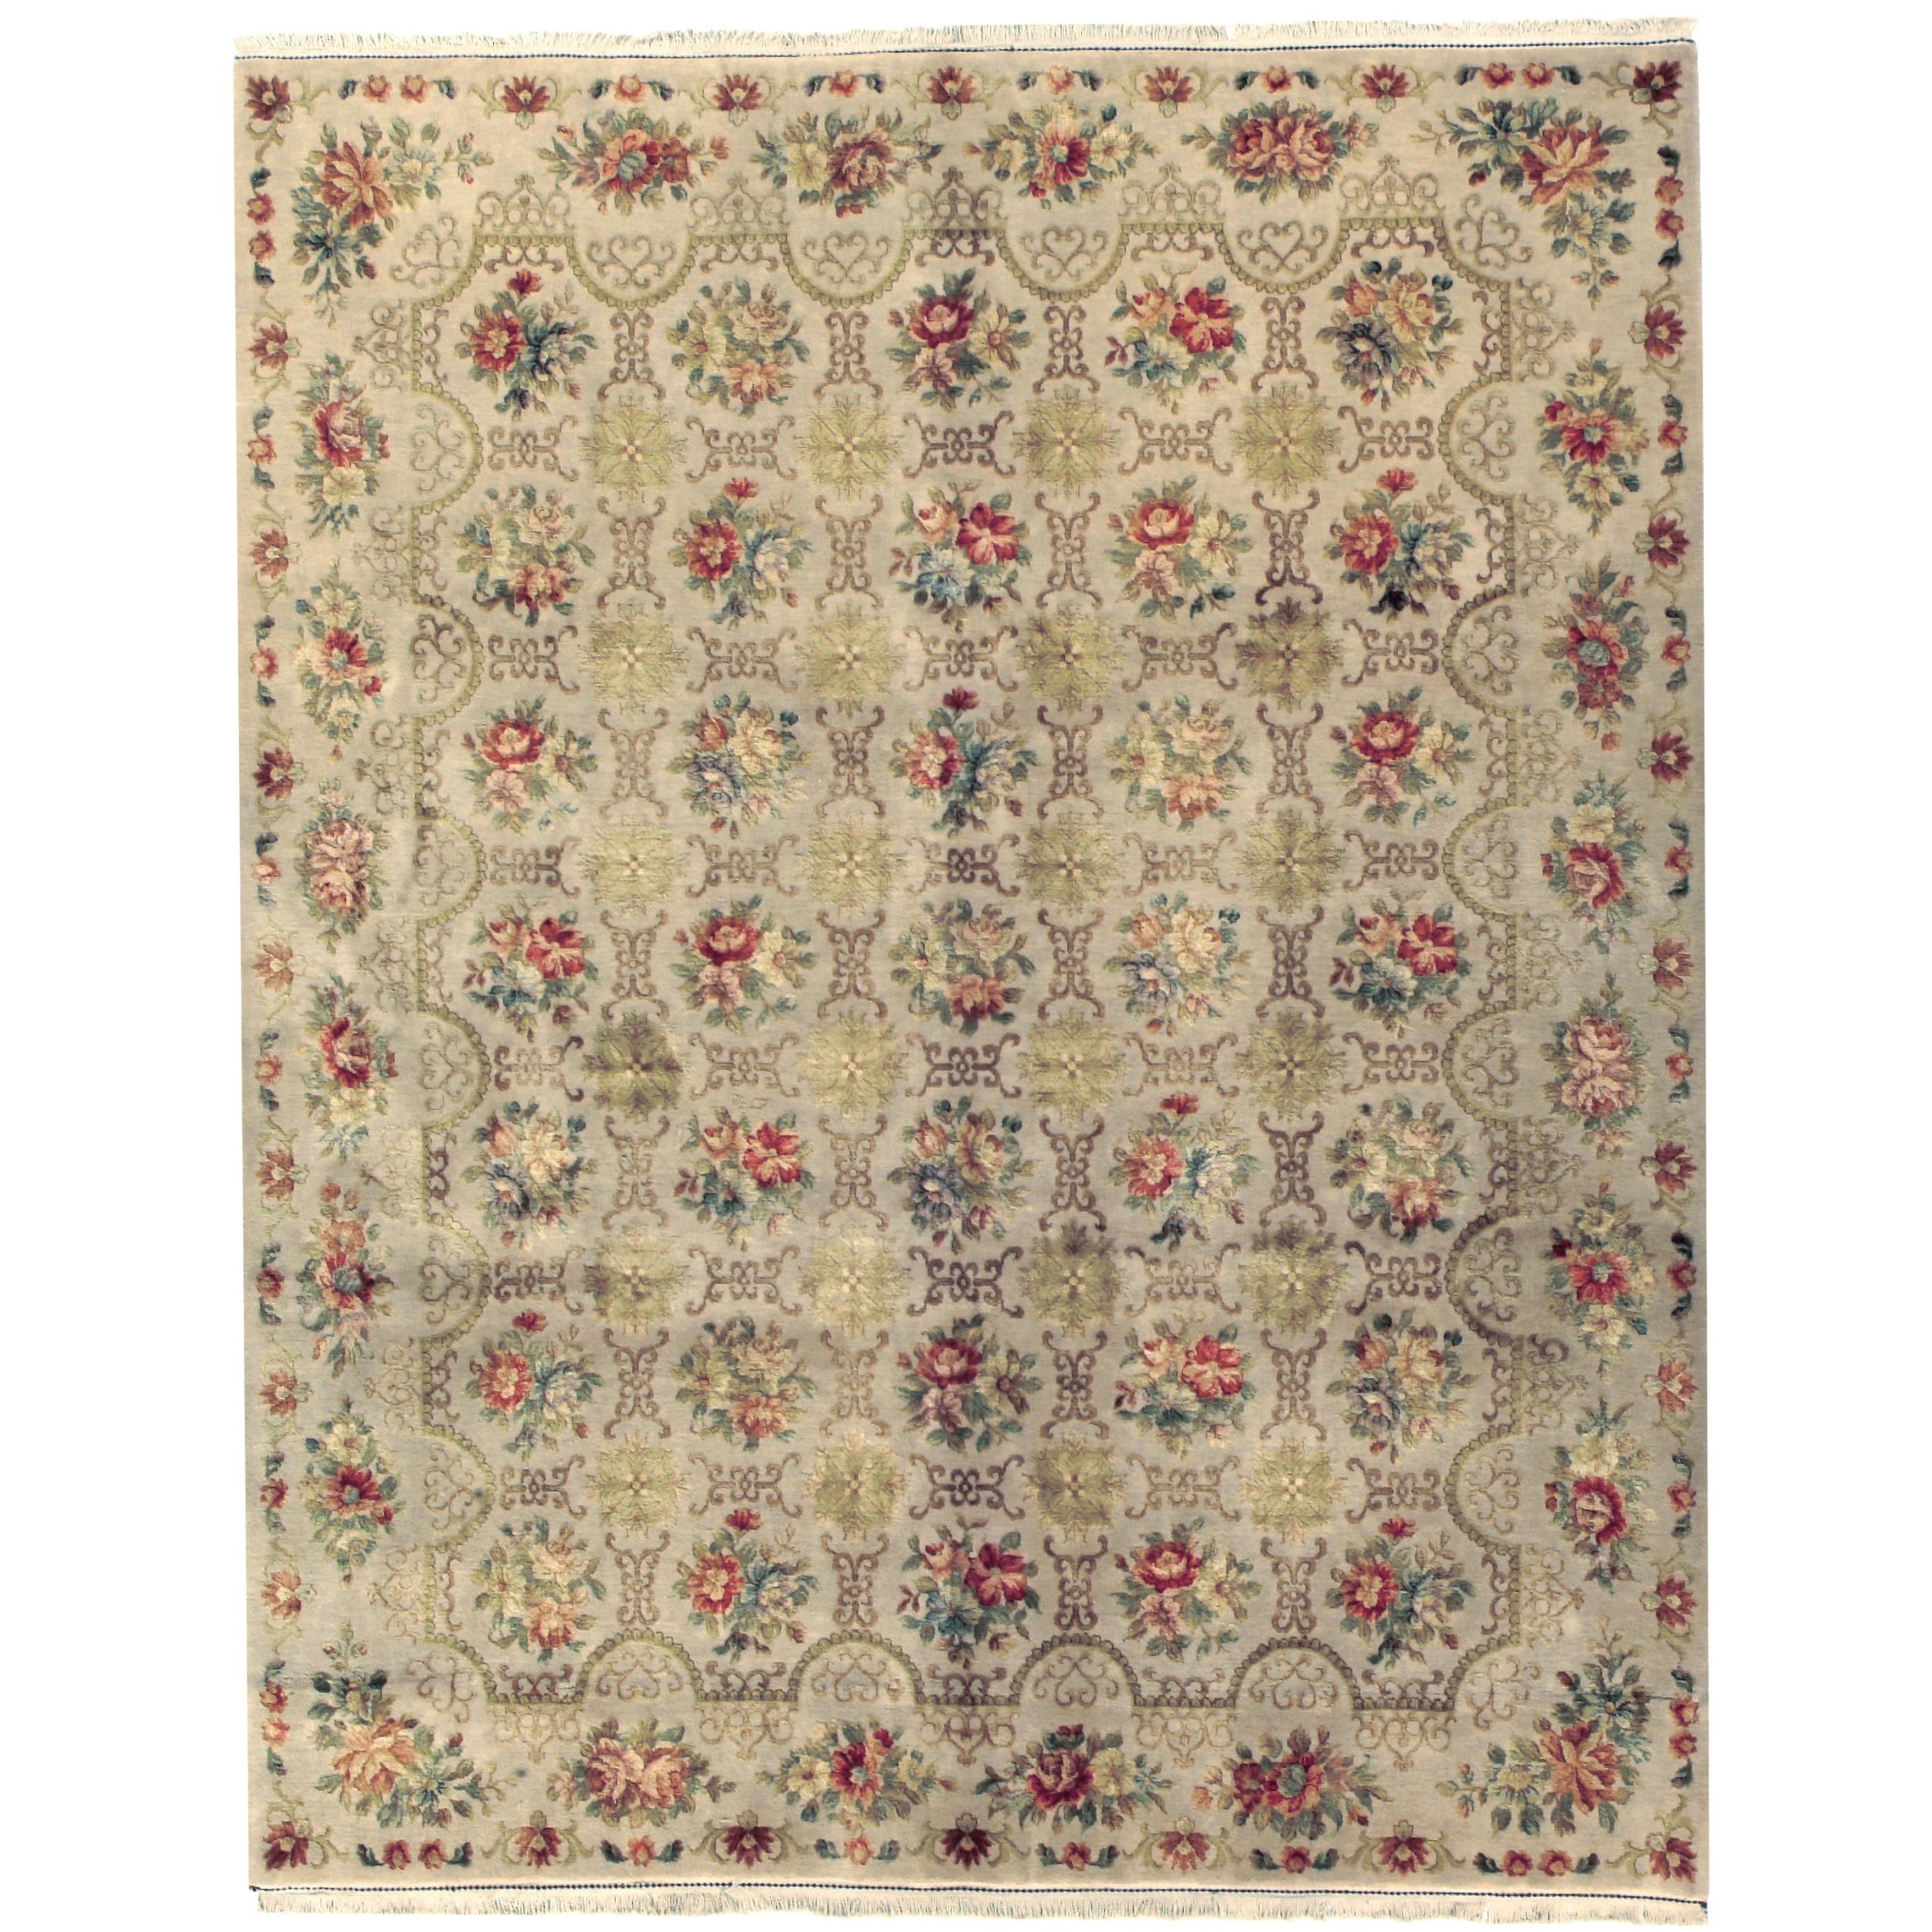 Luxury European Hand-Knotted Cambridge Oyster 10x14 Rug In New Condition For Sale In Secaucus, NJ